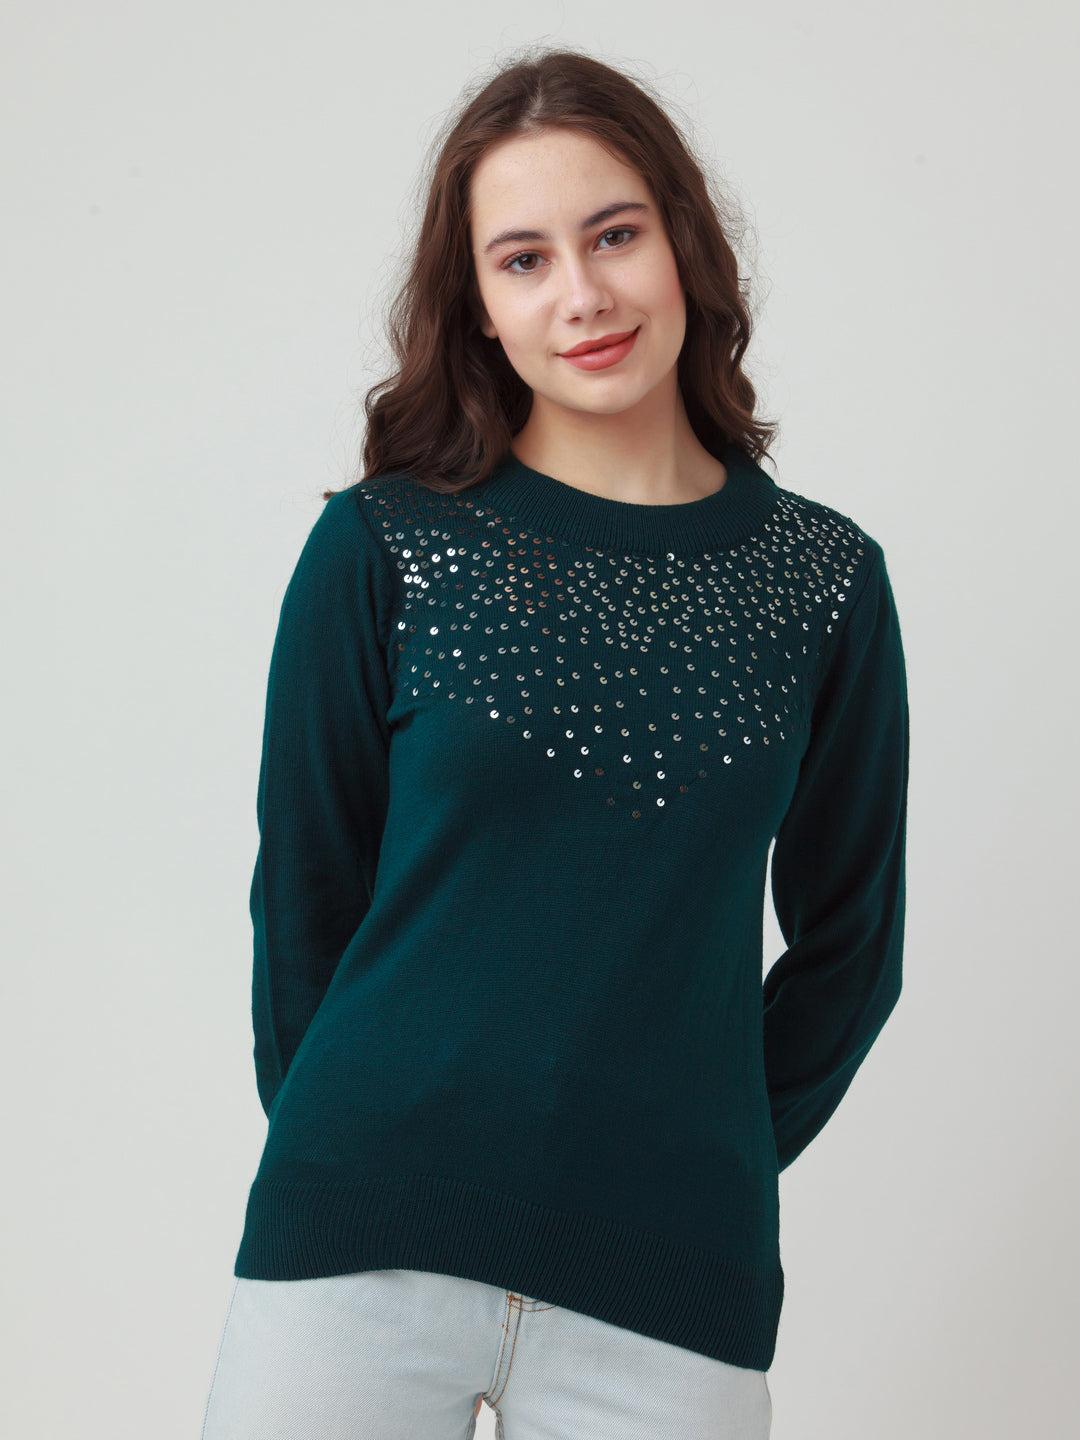 Green Solid Straight Sweater For Women By Zink London